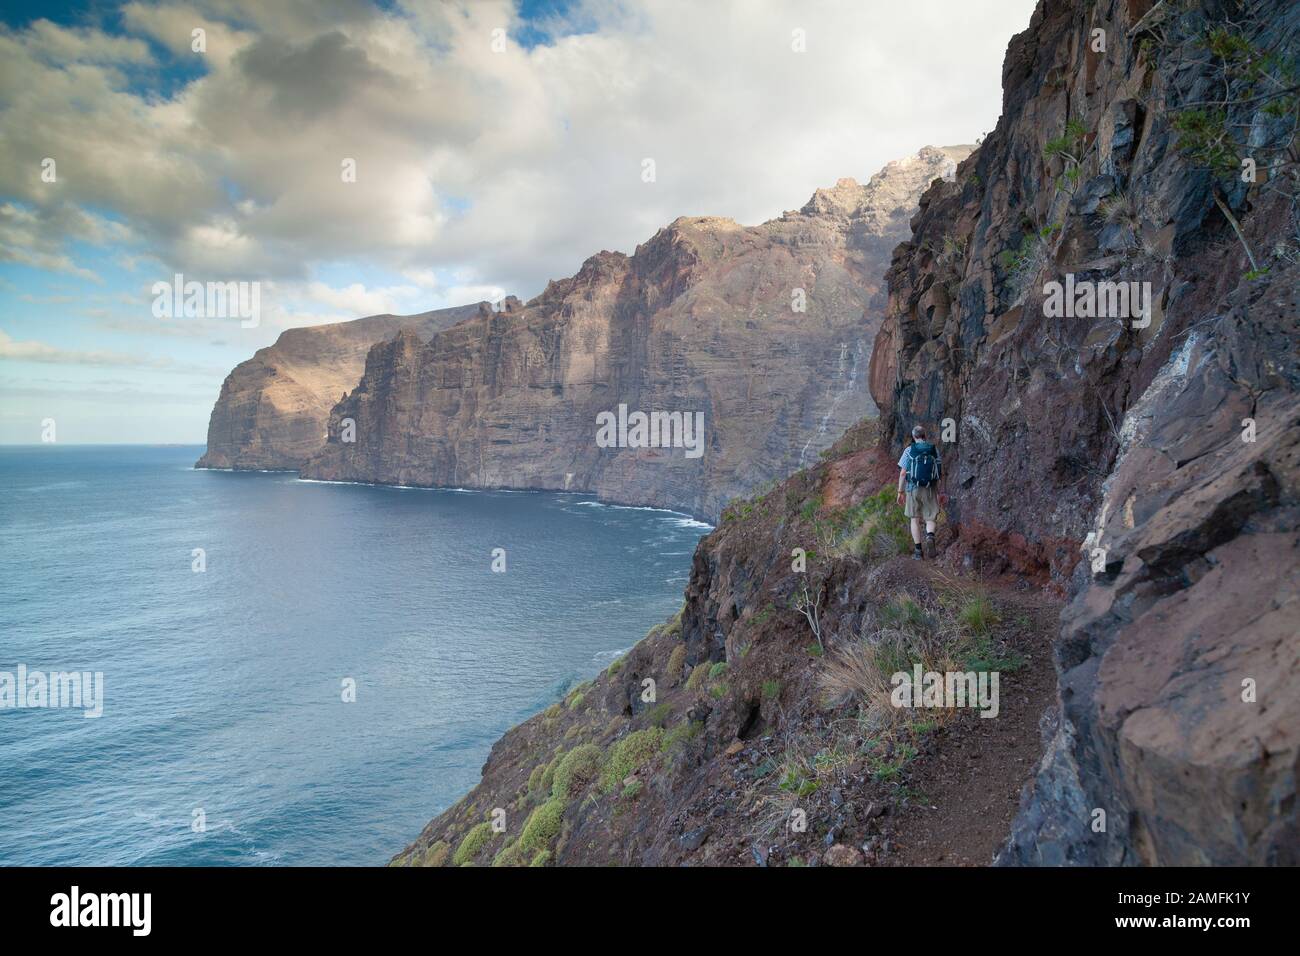 Walking along the cliff path in Los Gigantes, Los Gigantes Cliff, Tenerife, Canary Islands, Spain Stock Photo